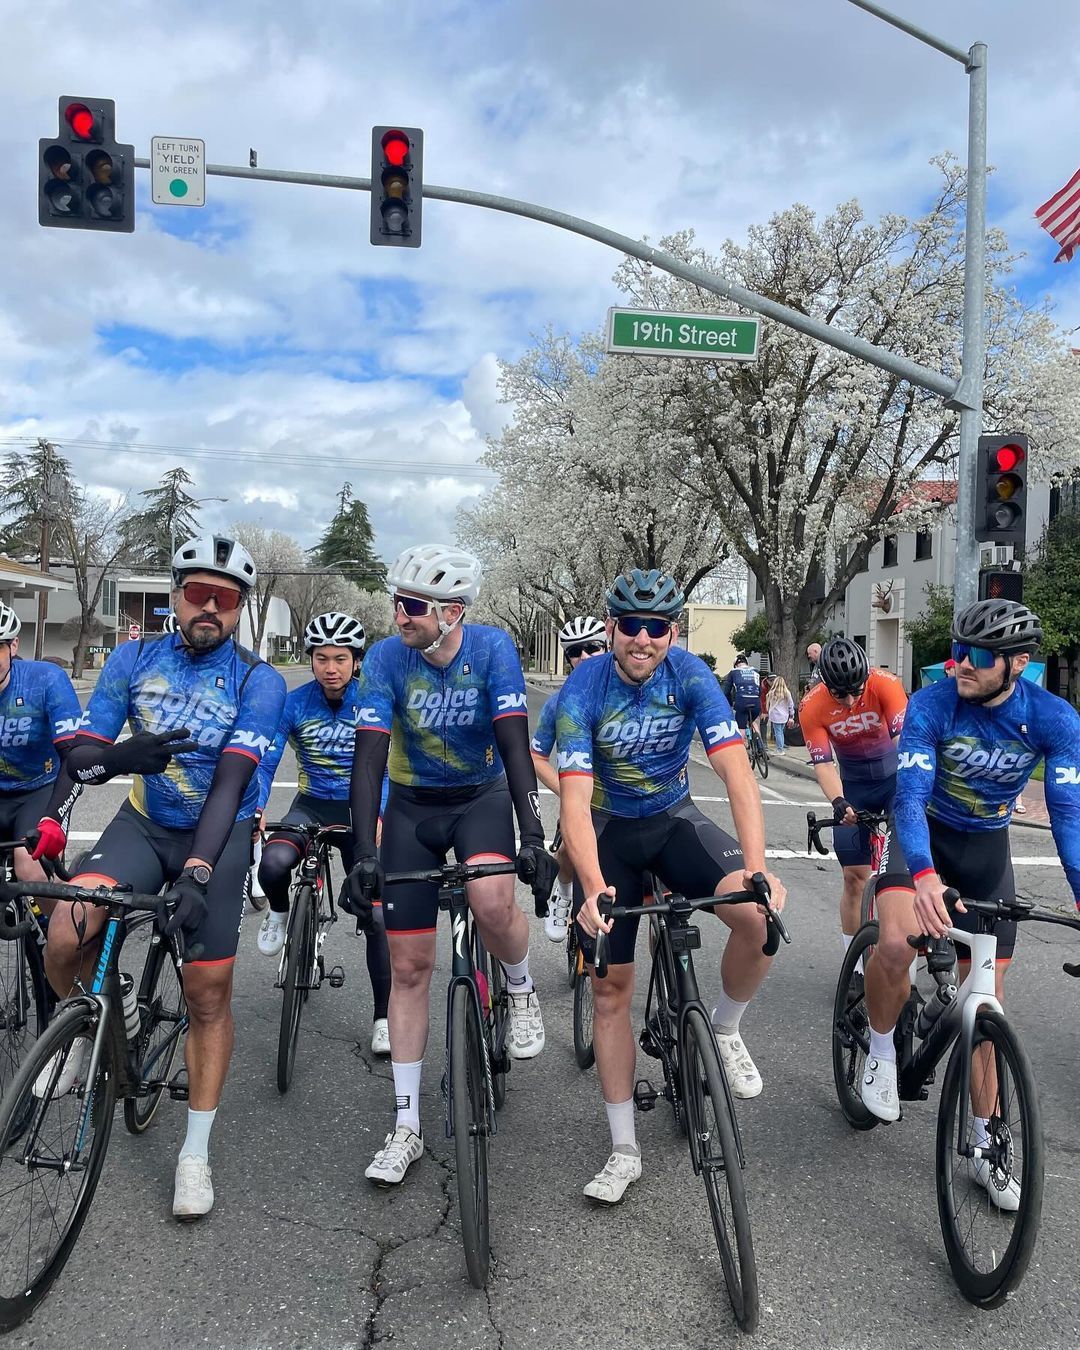 After a bit of frustration from a cancelled Snelling road race (thank you @velopromo and @bike_curious for thinking safety first!), the boys lined up for the #mercedcriterium.  While it didn’t go our way for the group of hitters we have lining up for our Cat 4 squad, we know there are good things to come! In the 35+123 race, our DVC diesel engine @jyangsta showed that he’s brought the huge gains in fitness across to the 2024 season, nailing 🥇in a field with some of the strongest masters racers in the #ncnca ! Congrats James, and to the rest of the squad for flying the colors! On to the next race!

@sportful @sfitalianathleticclub @equatorcoffees @poggio_labs @achieveptc @tripsforkidsmarin @sage.realestategroup @marinservicecourse @jkbrkb  #onewealthadvisors